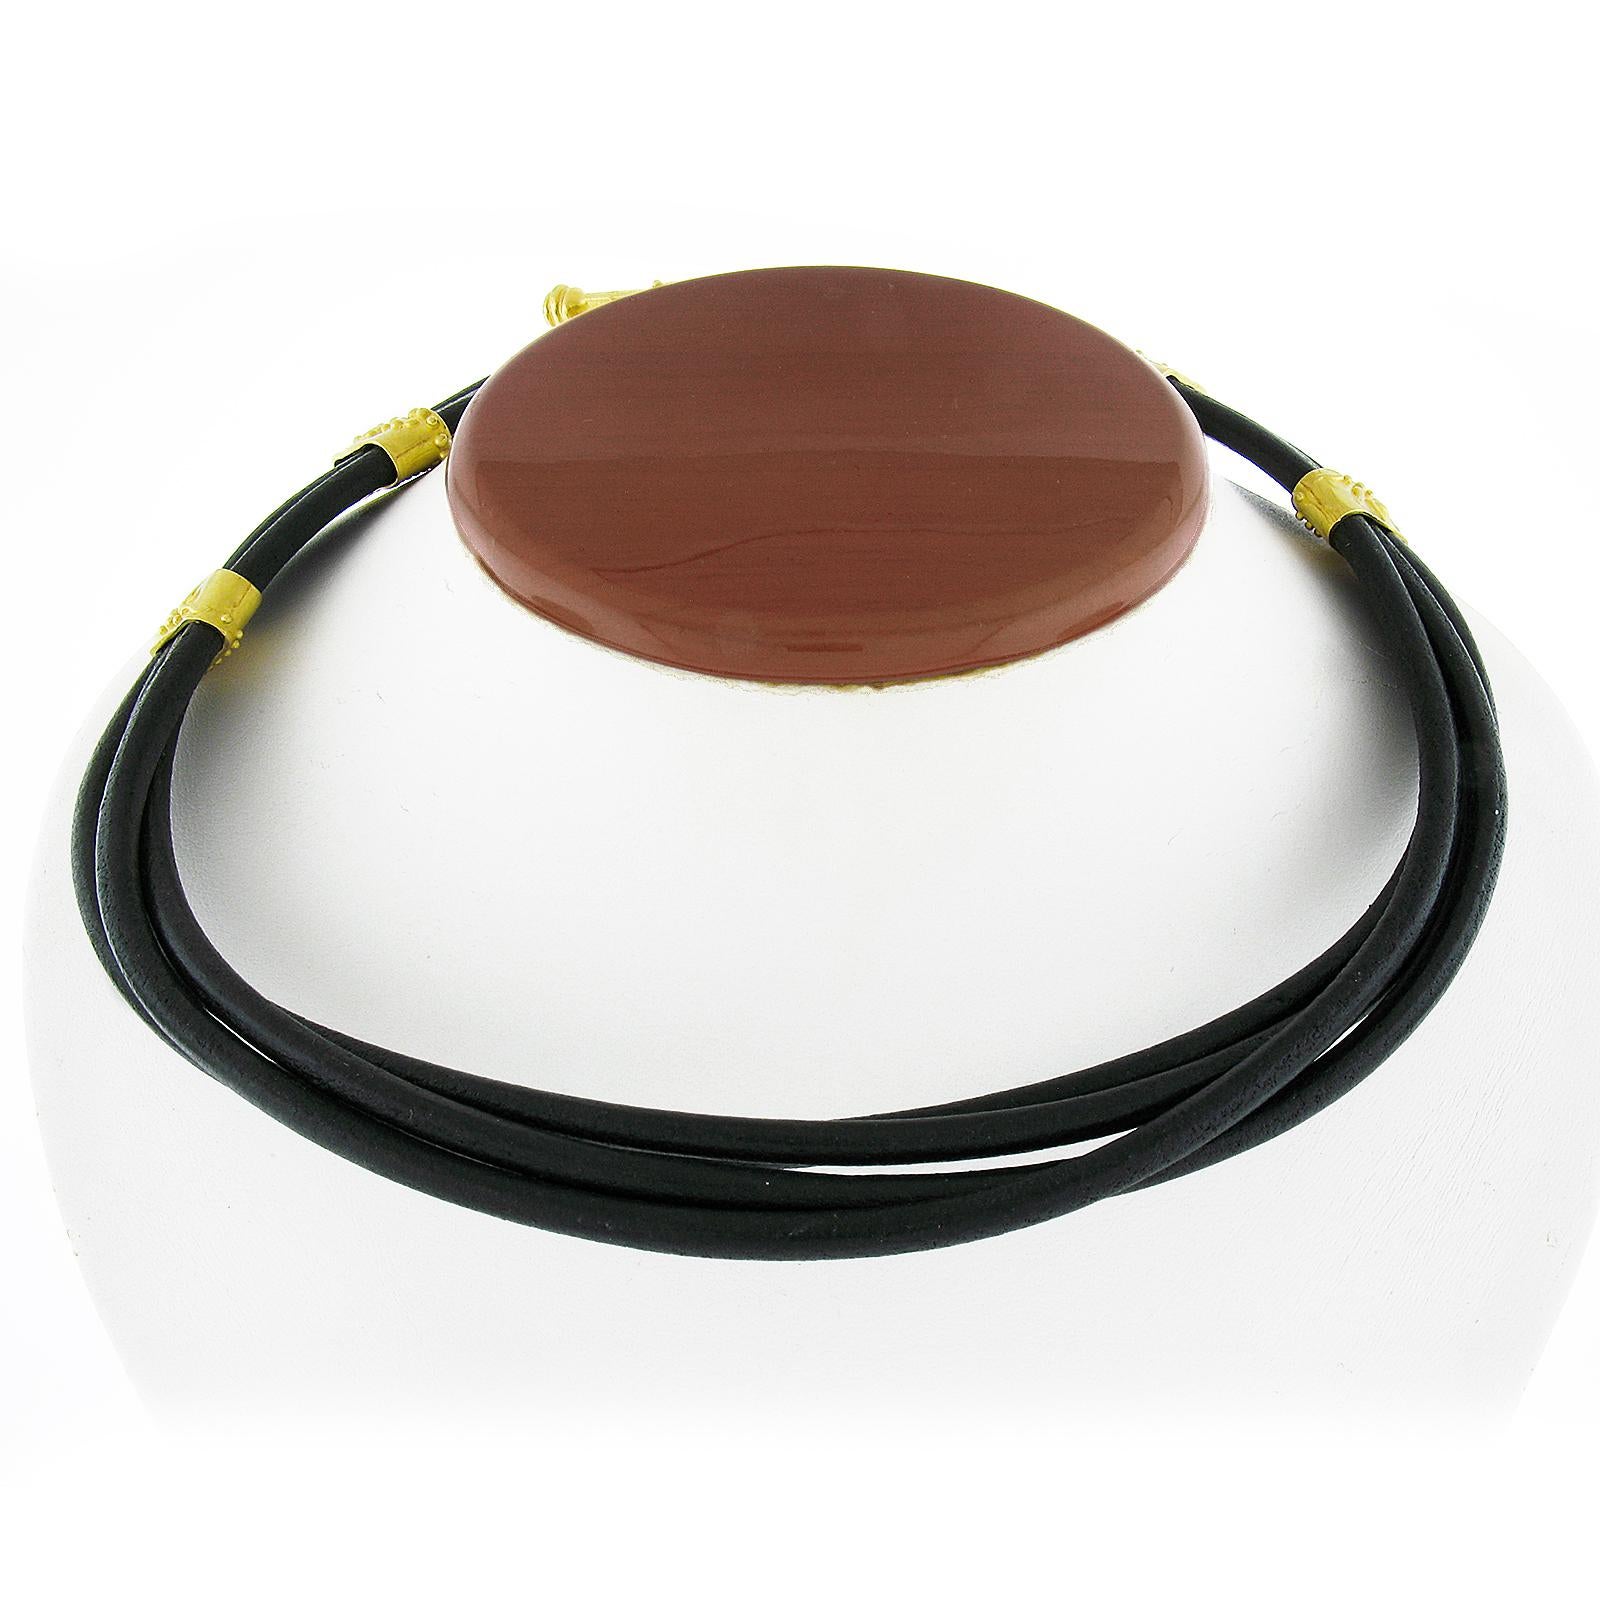 Material: Solid 22k Yellow Gold w/ Black Leather Cord
Weight: 75.69 Grams
Chain Type: Black Leather Multi Cord
Chain Length:	17.5 Inches (approx.)
Clasp Bar Length: 43.6mm (1.7